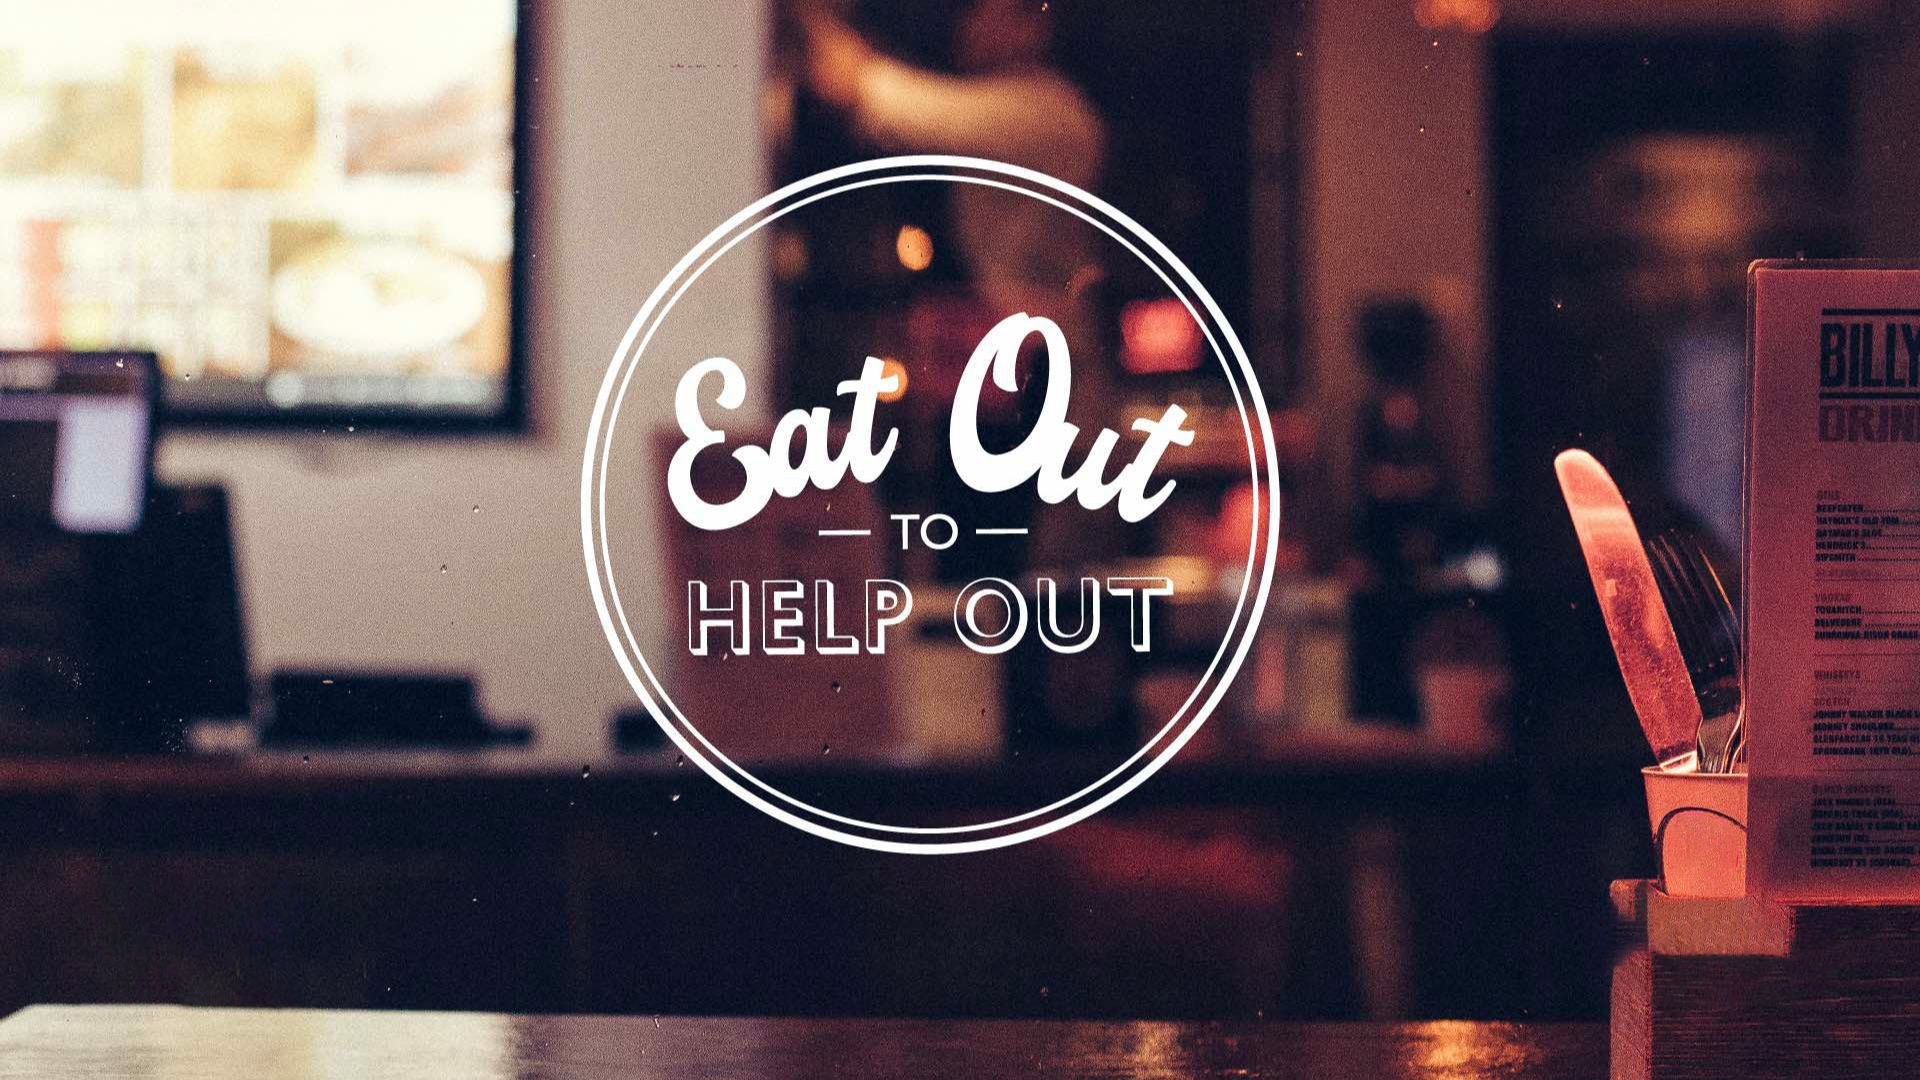 Eat Out to Help Out